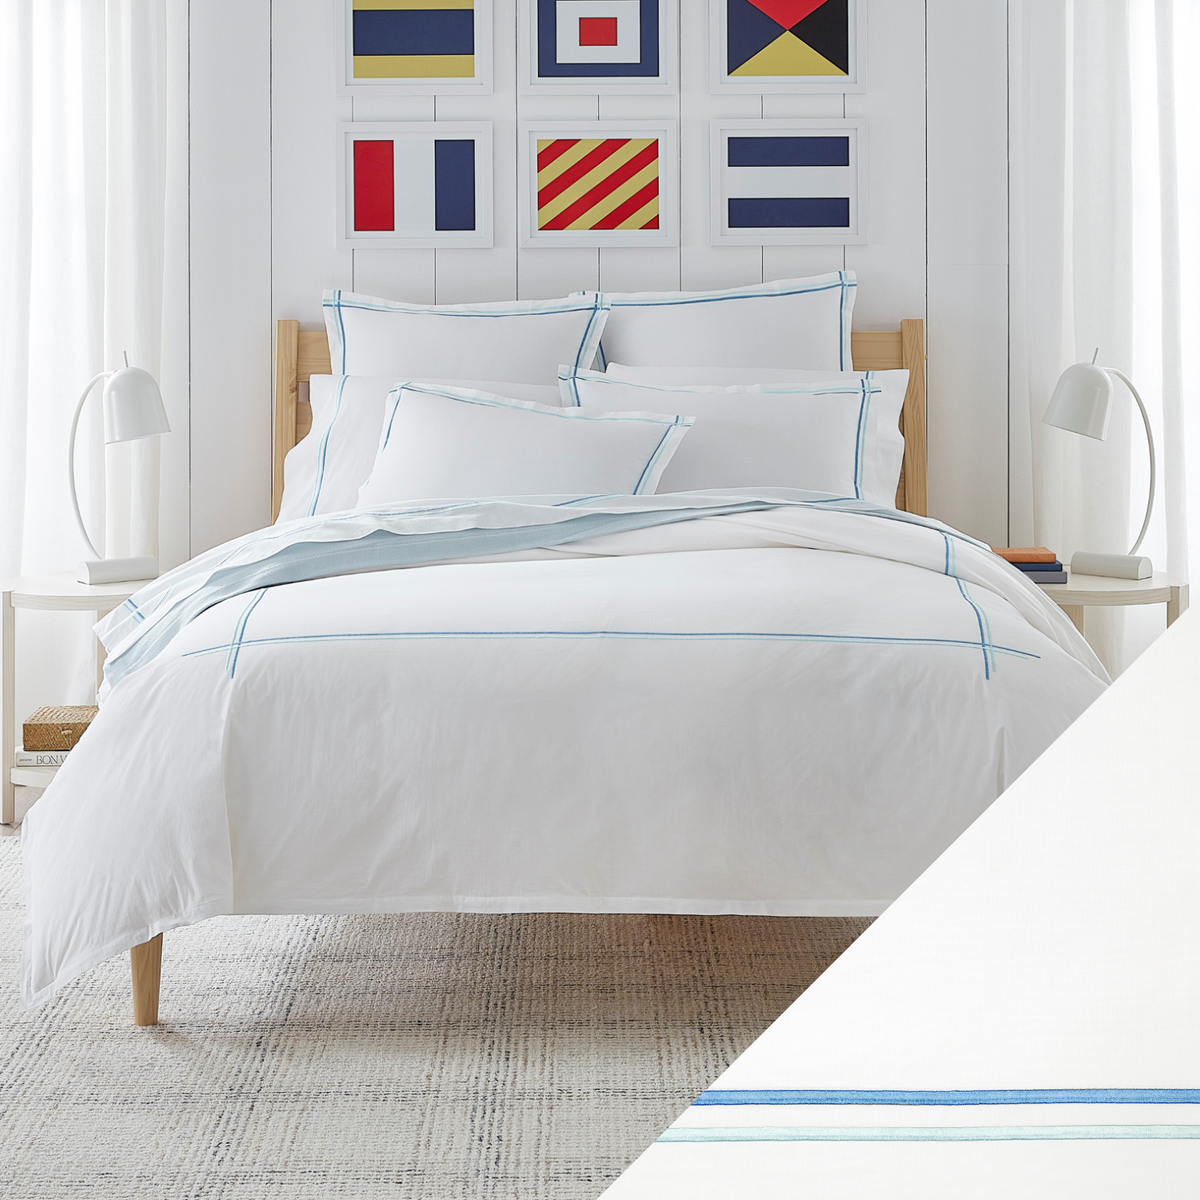 Full Lifestyle Image of Sferra Tratto Bedding with Swatch of White/Clearwater